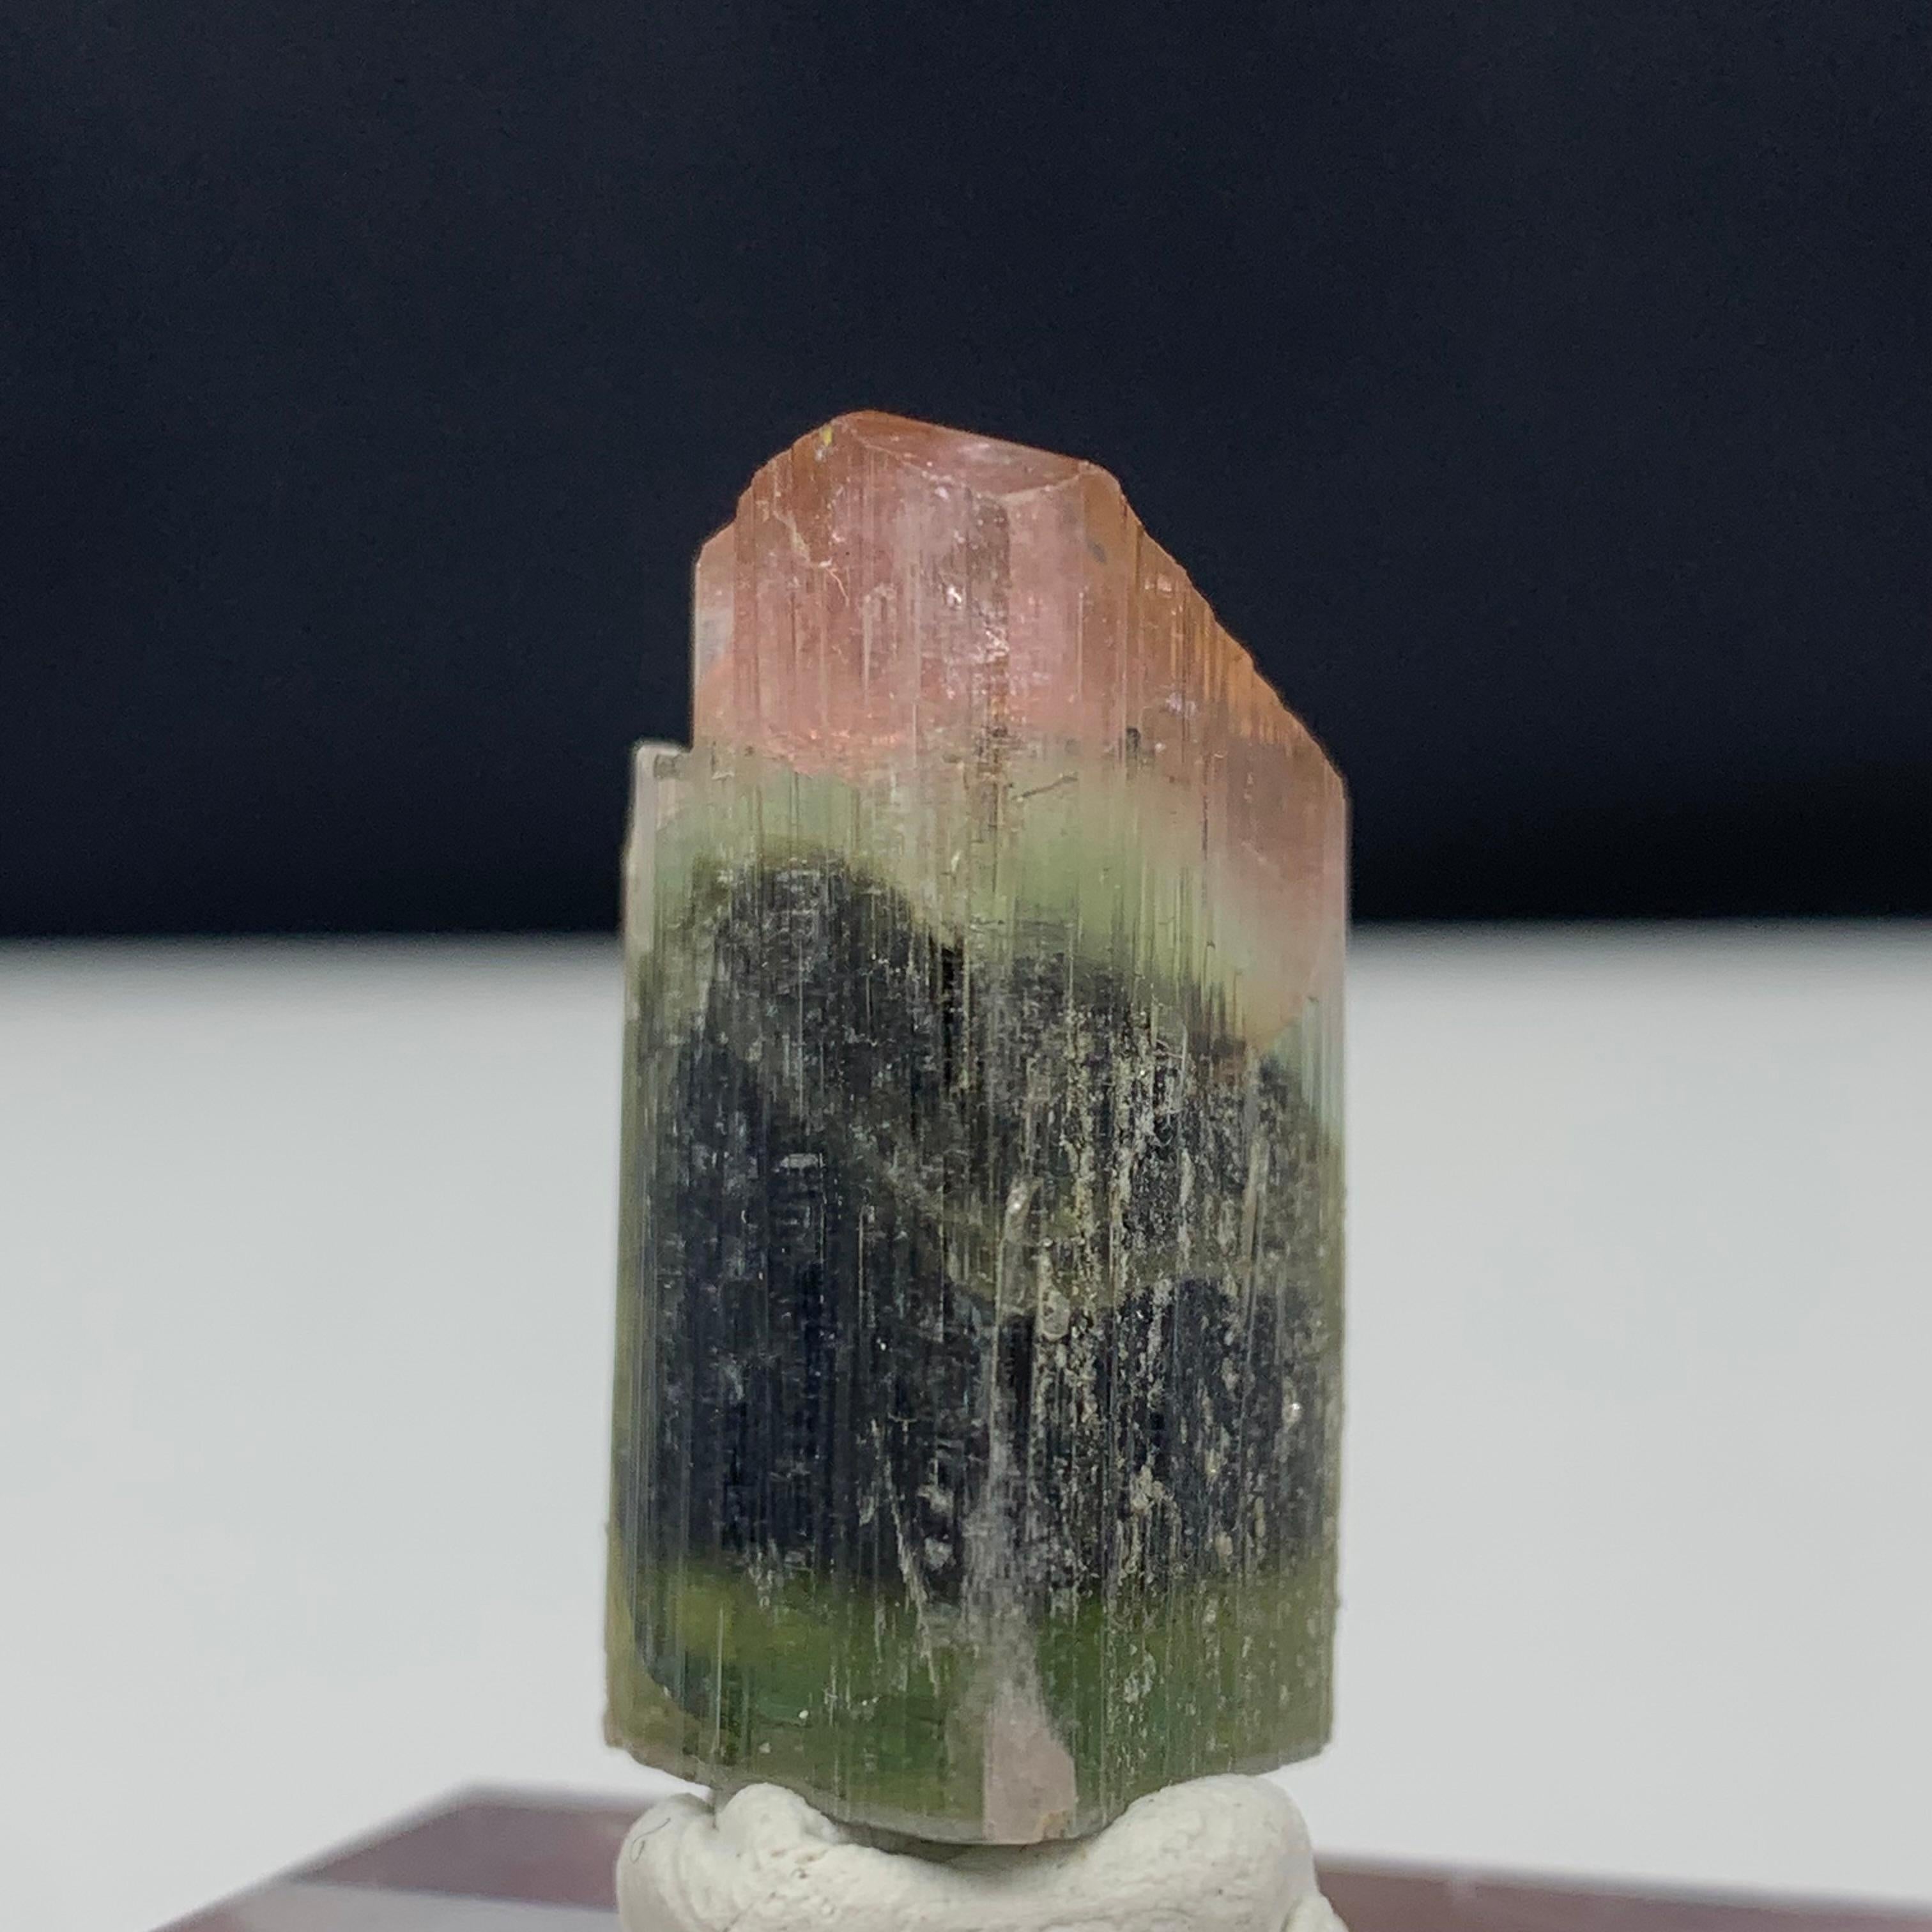 Glamorous Tri Color Tourmaline Crystal From Pakistan
WEIGHT: 65.80 Carat
DIMENSIONS: 2.8 x 1.7 x 1.6 Cm
ORIGIN: Stak Nala, Gilgit Baltistan, Pakistan 
Color : Pink, Green And Dark Green 
TREATMENT : None

Tourmaline is an extremely popular